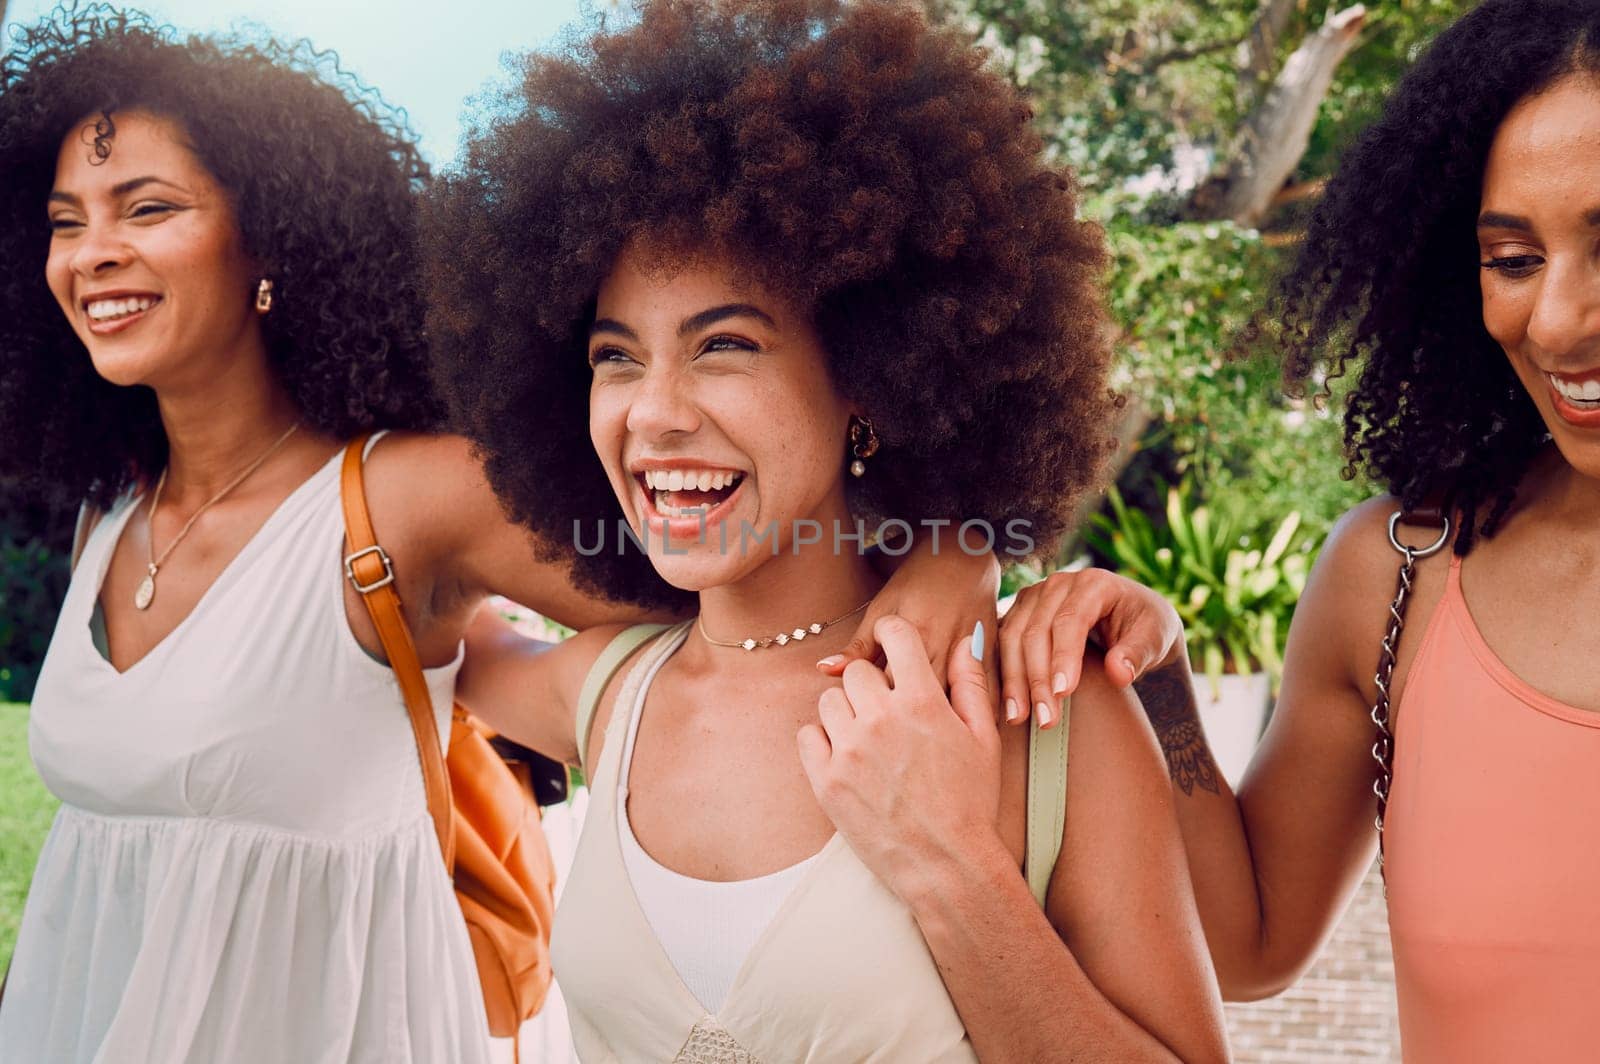 Friends face, beauty and happy smile on summer holiday and together in Miami, travel and laugh with funny conversation and bond outdoor. Women, fashion and support with community, relax and vacation.